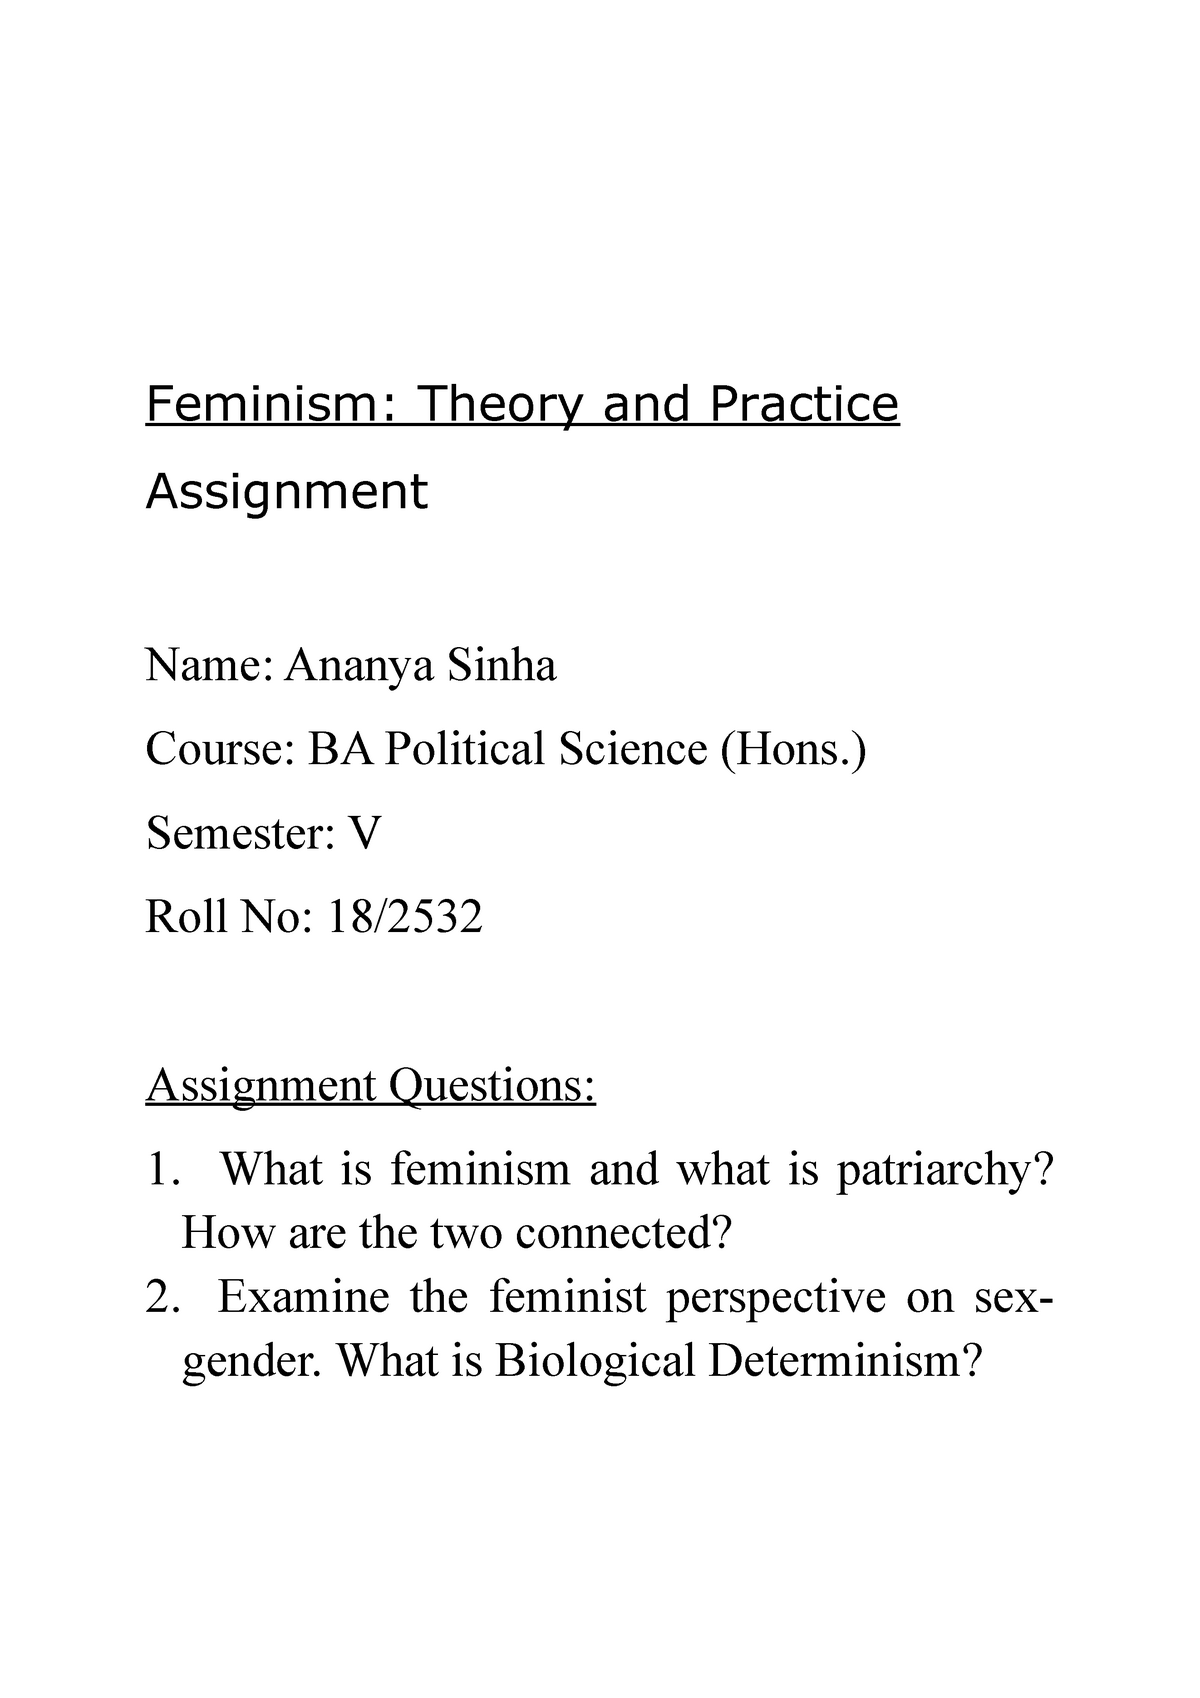 examples of thesis statements for feminism